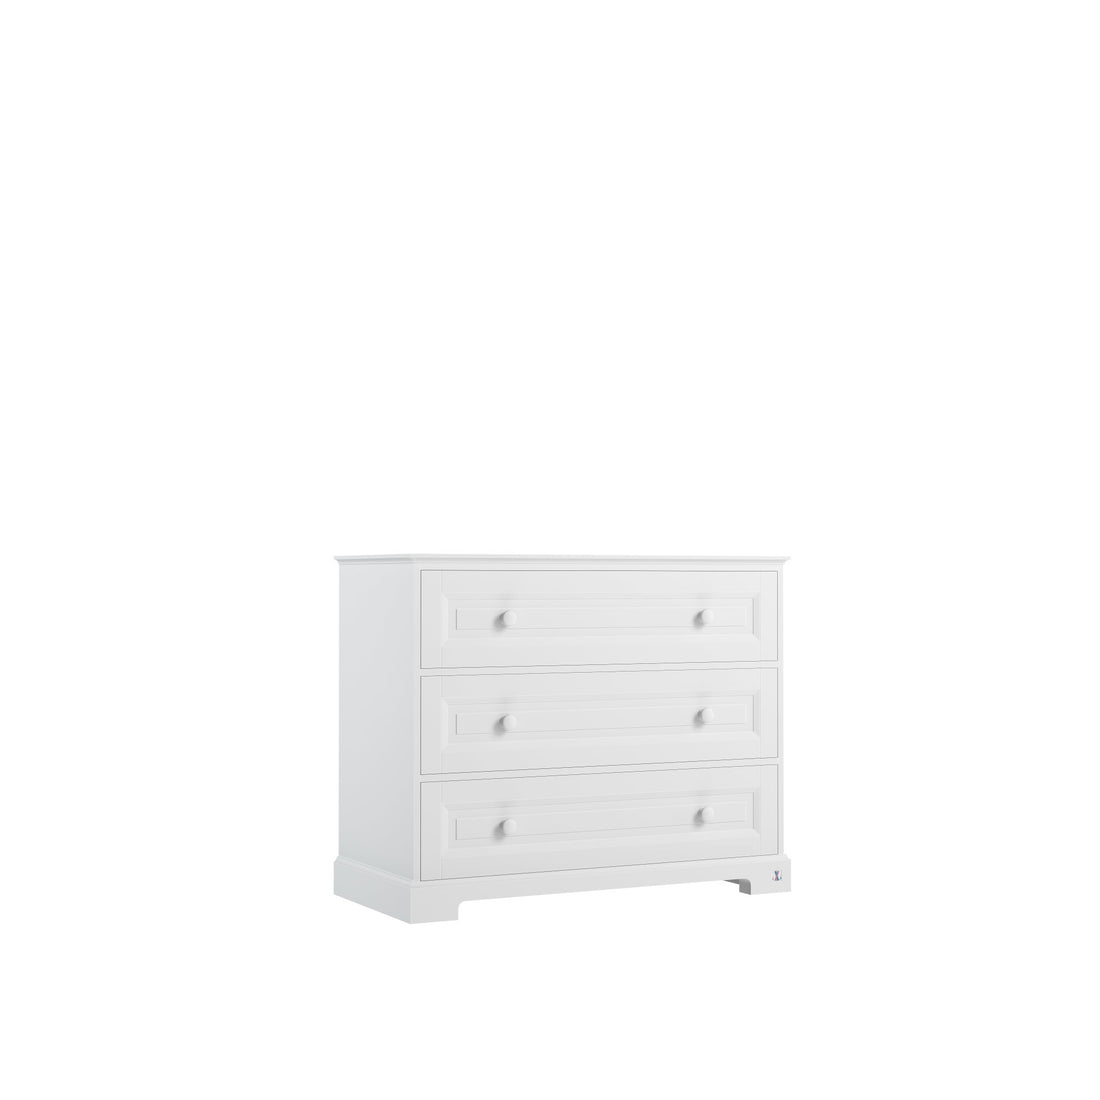 Chest ROYAL with 3 drawers | Changing table fpr baby room | Classic nursery furniture